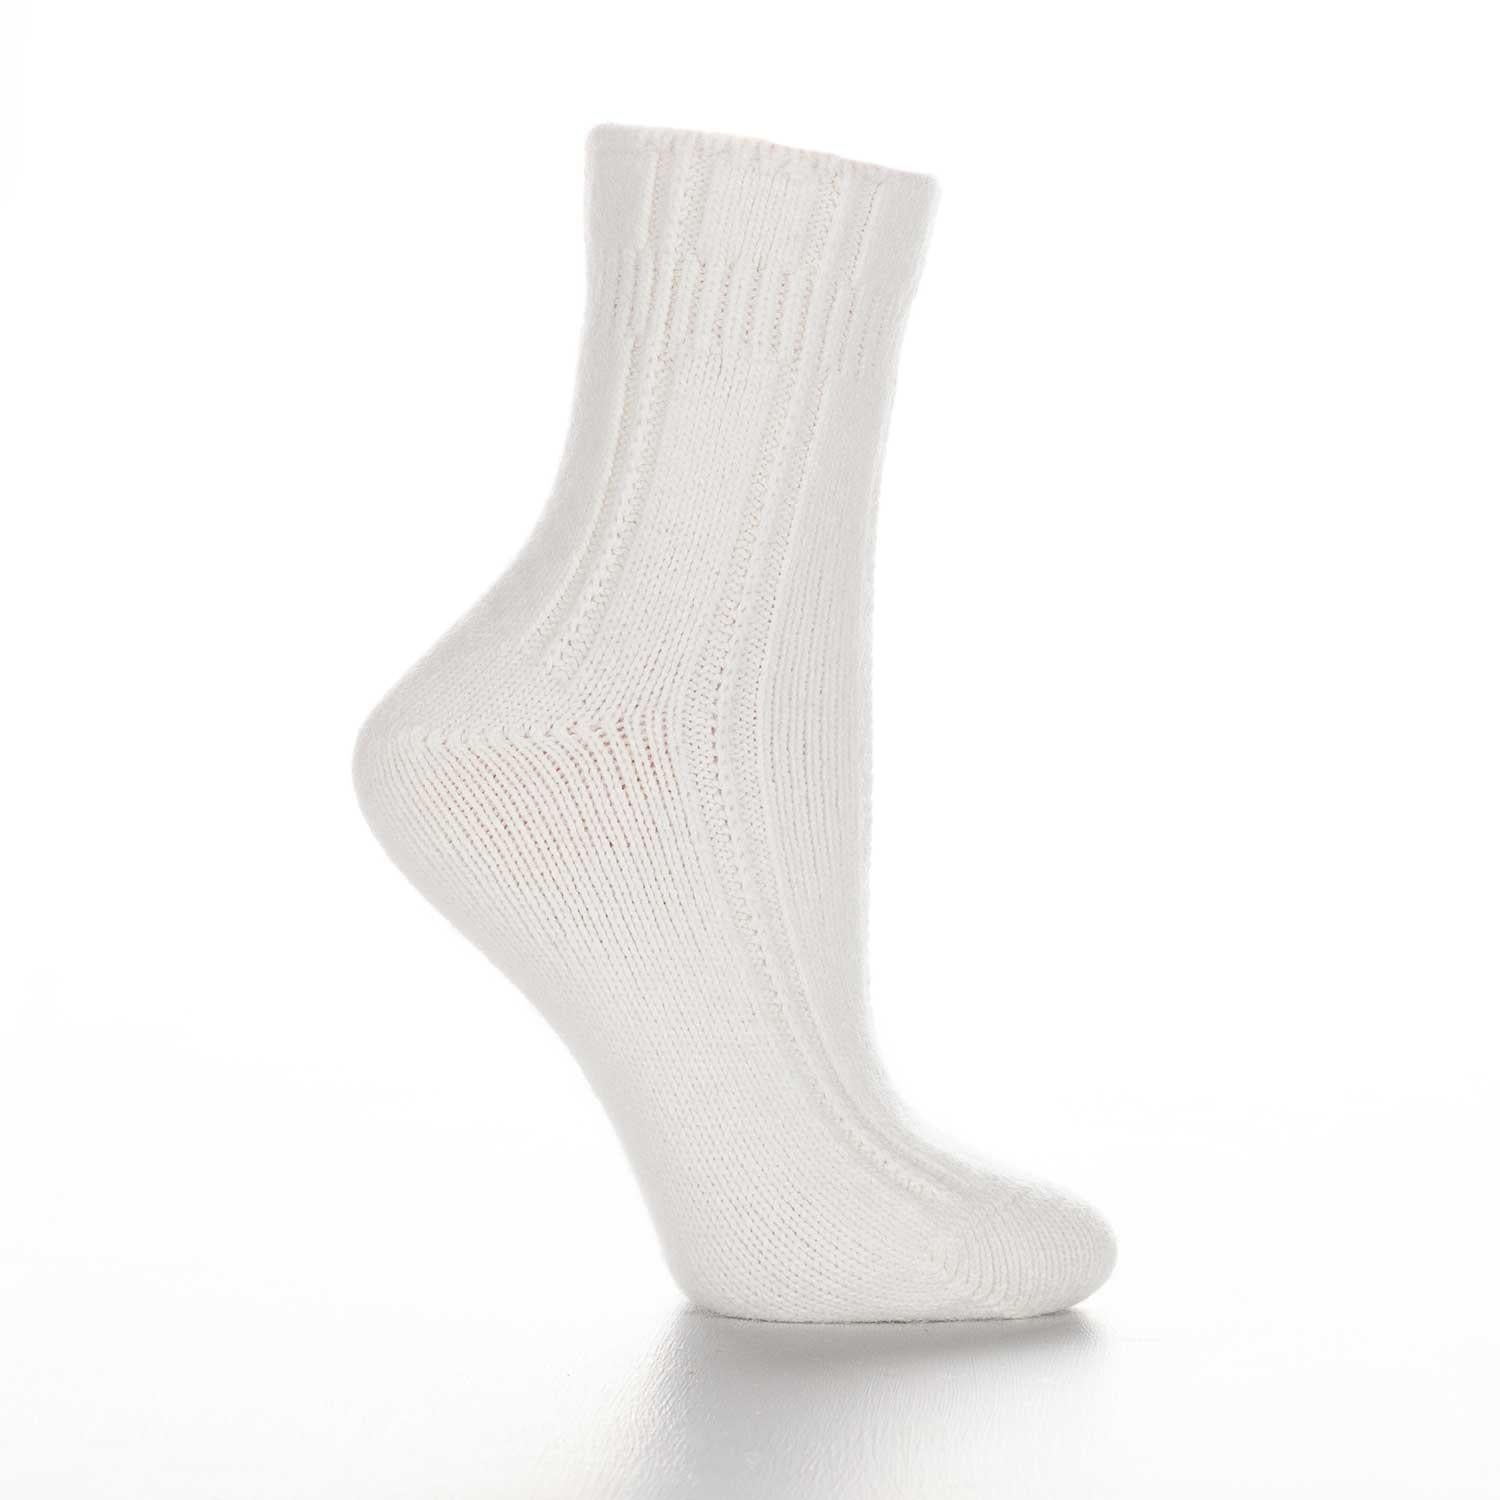 Angora Bed Socks. Ankle socks made with a blend of Angora fibres, with ...